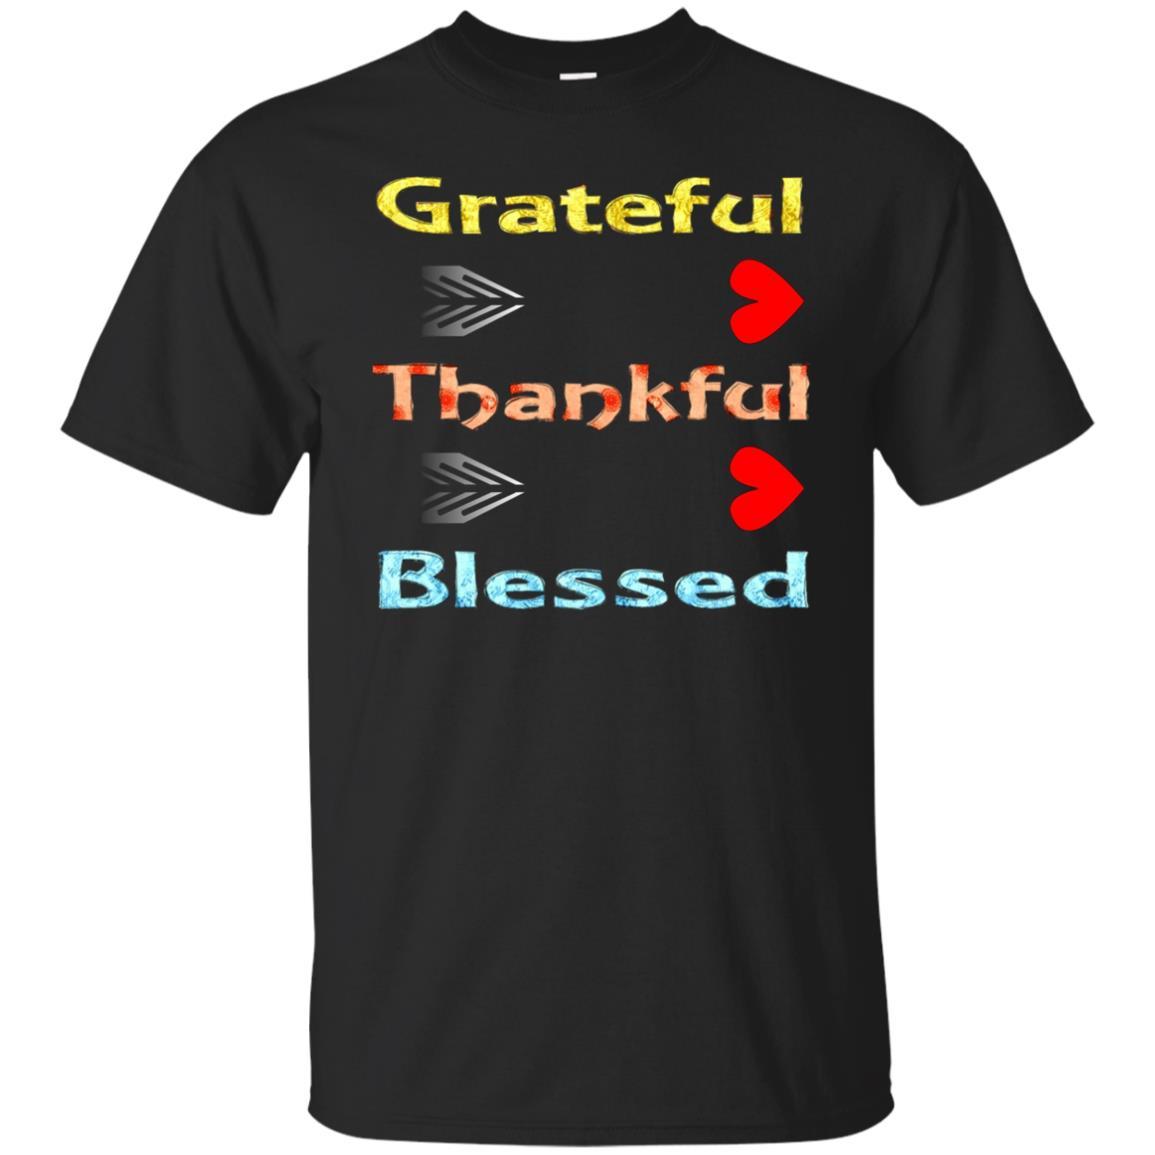 Grateful Thankful Blessed Shirt - Limited Thanksgiving Tee